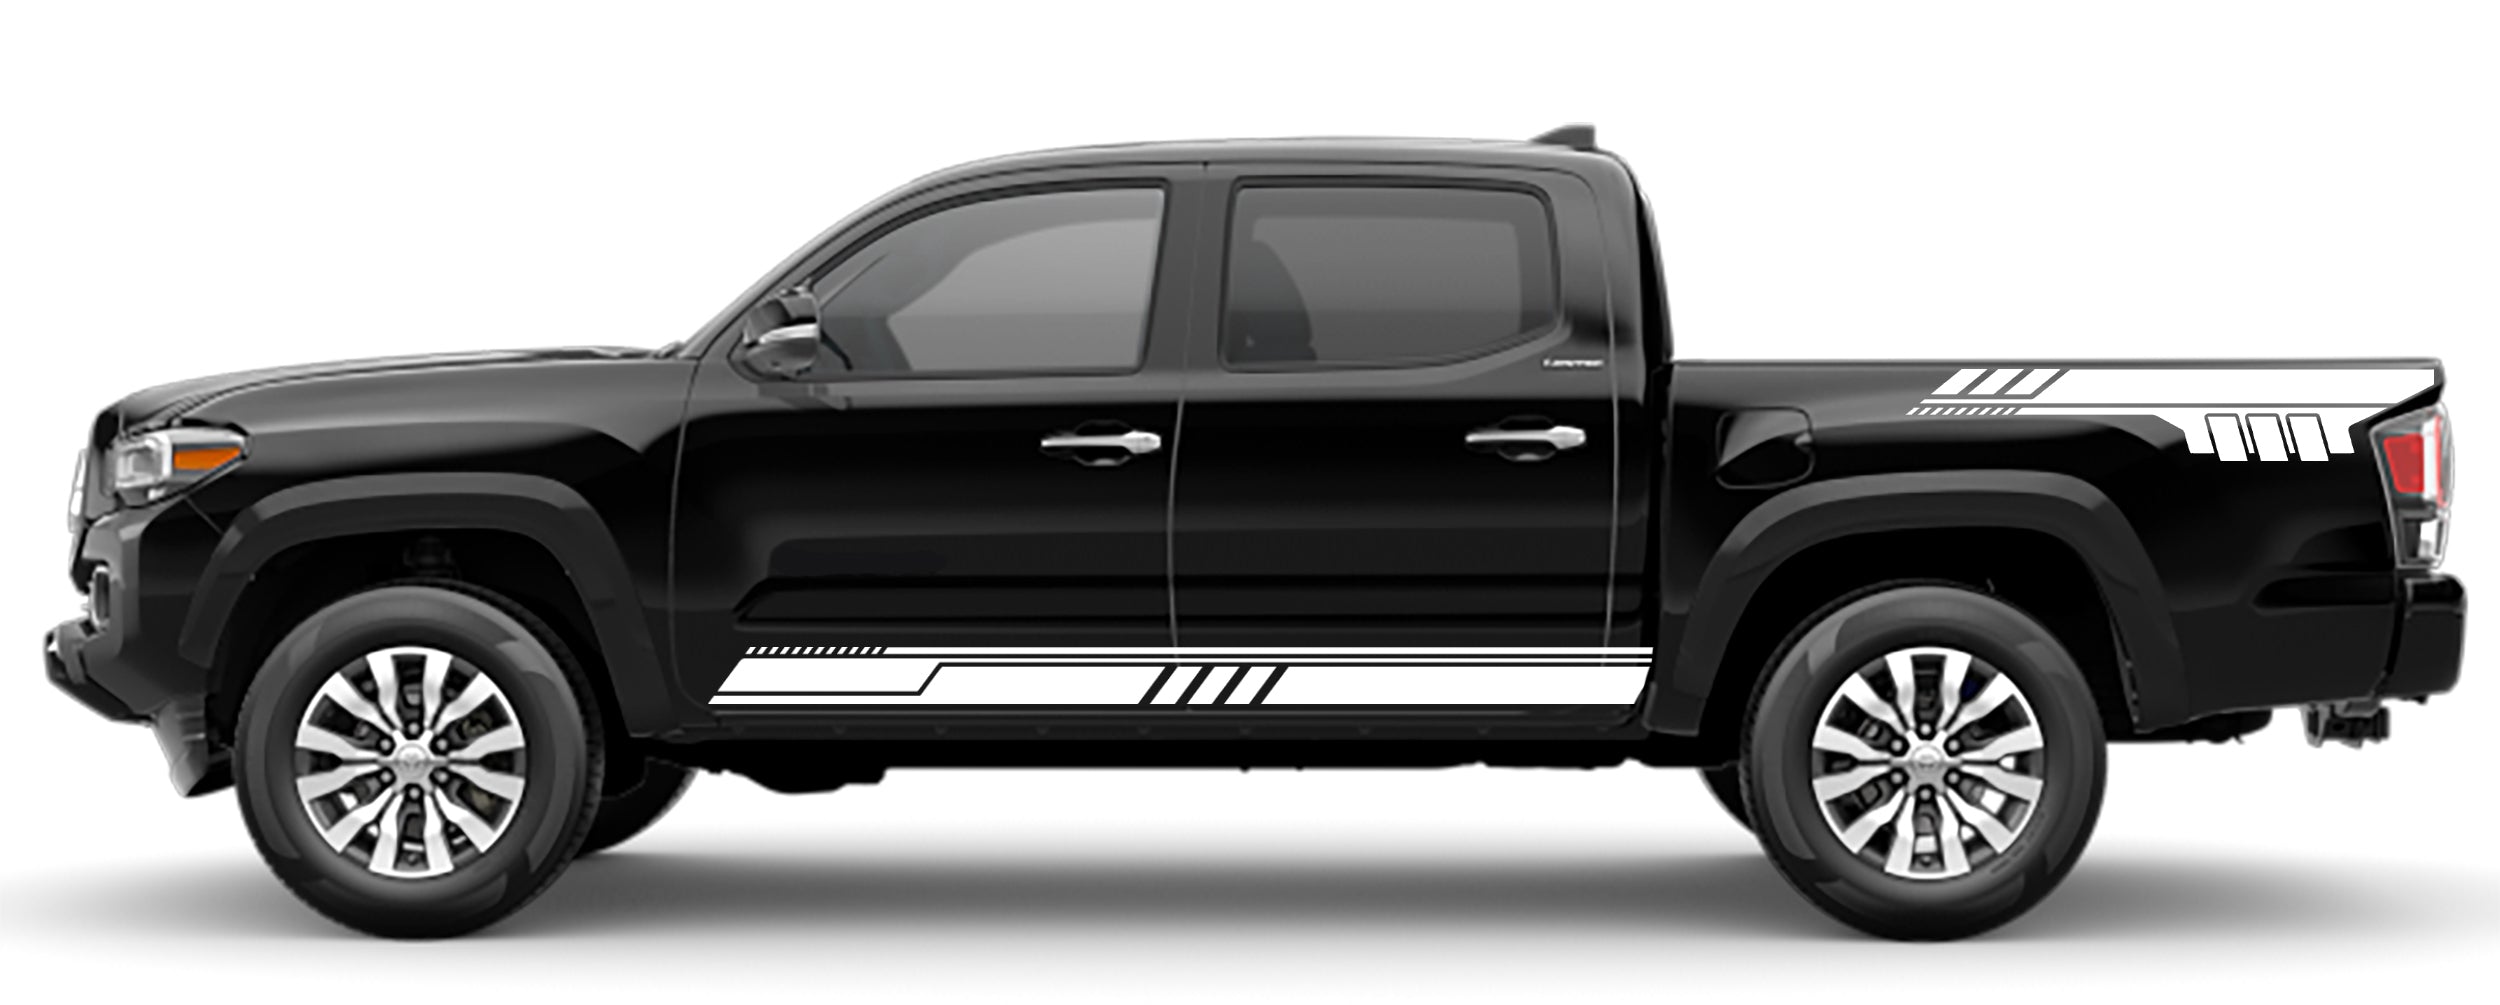 rocker panel and bed decals for toyota tacoma 2016 to 2023 models white